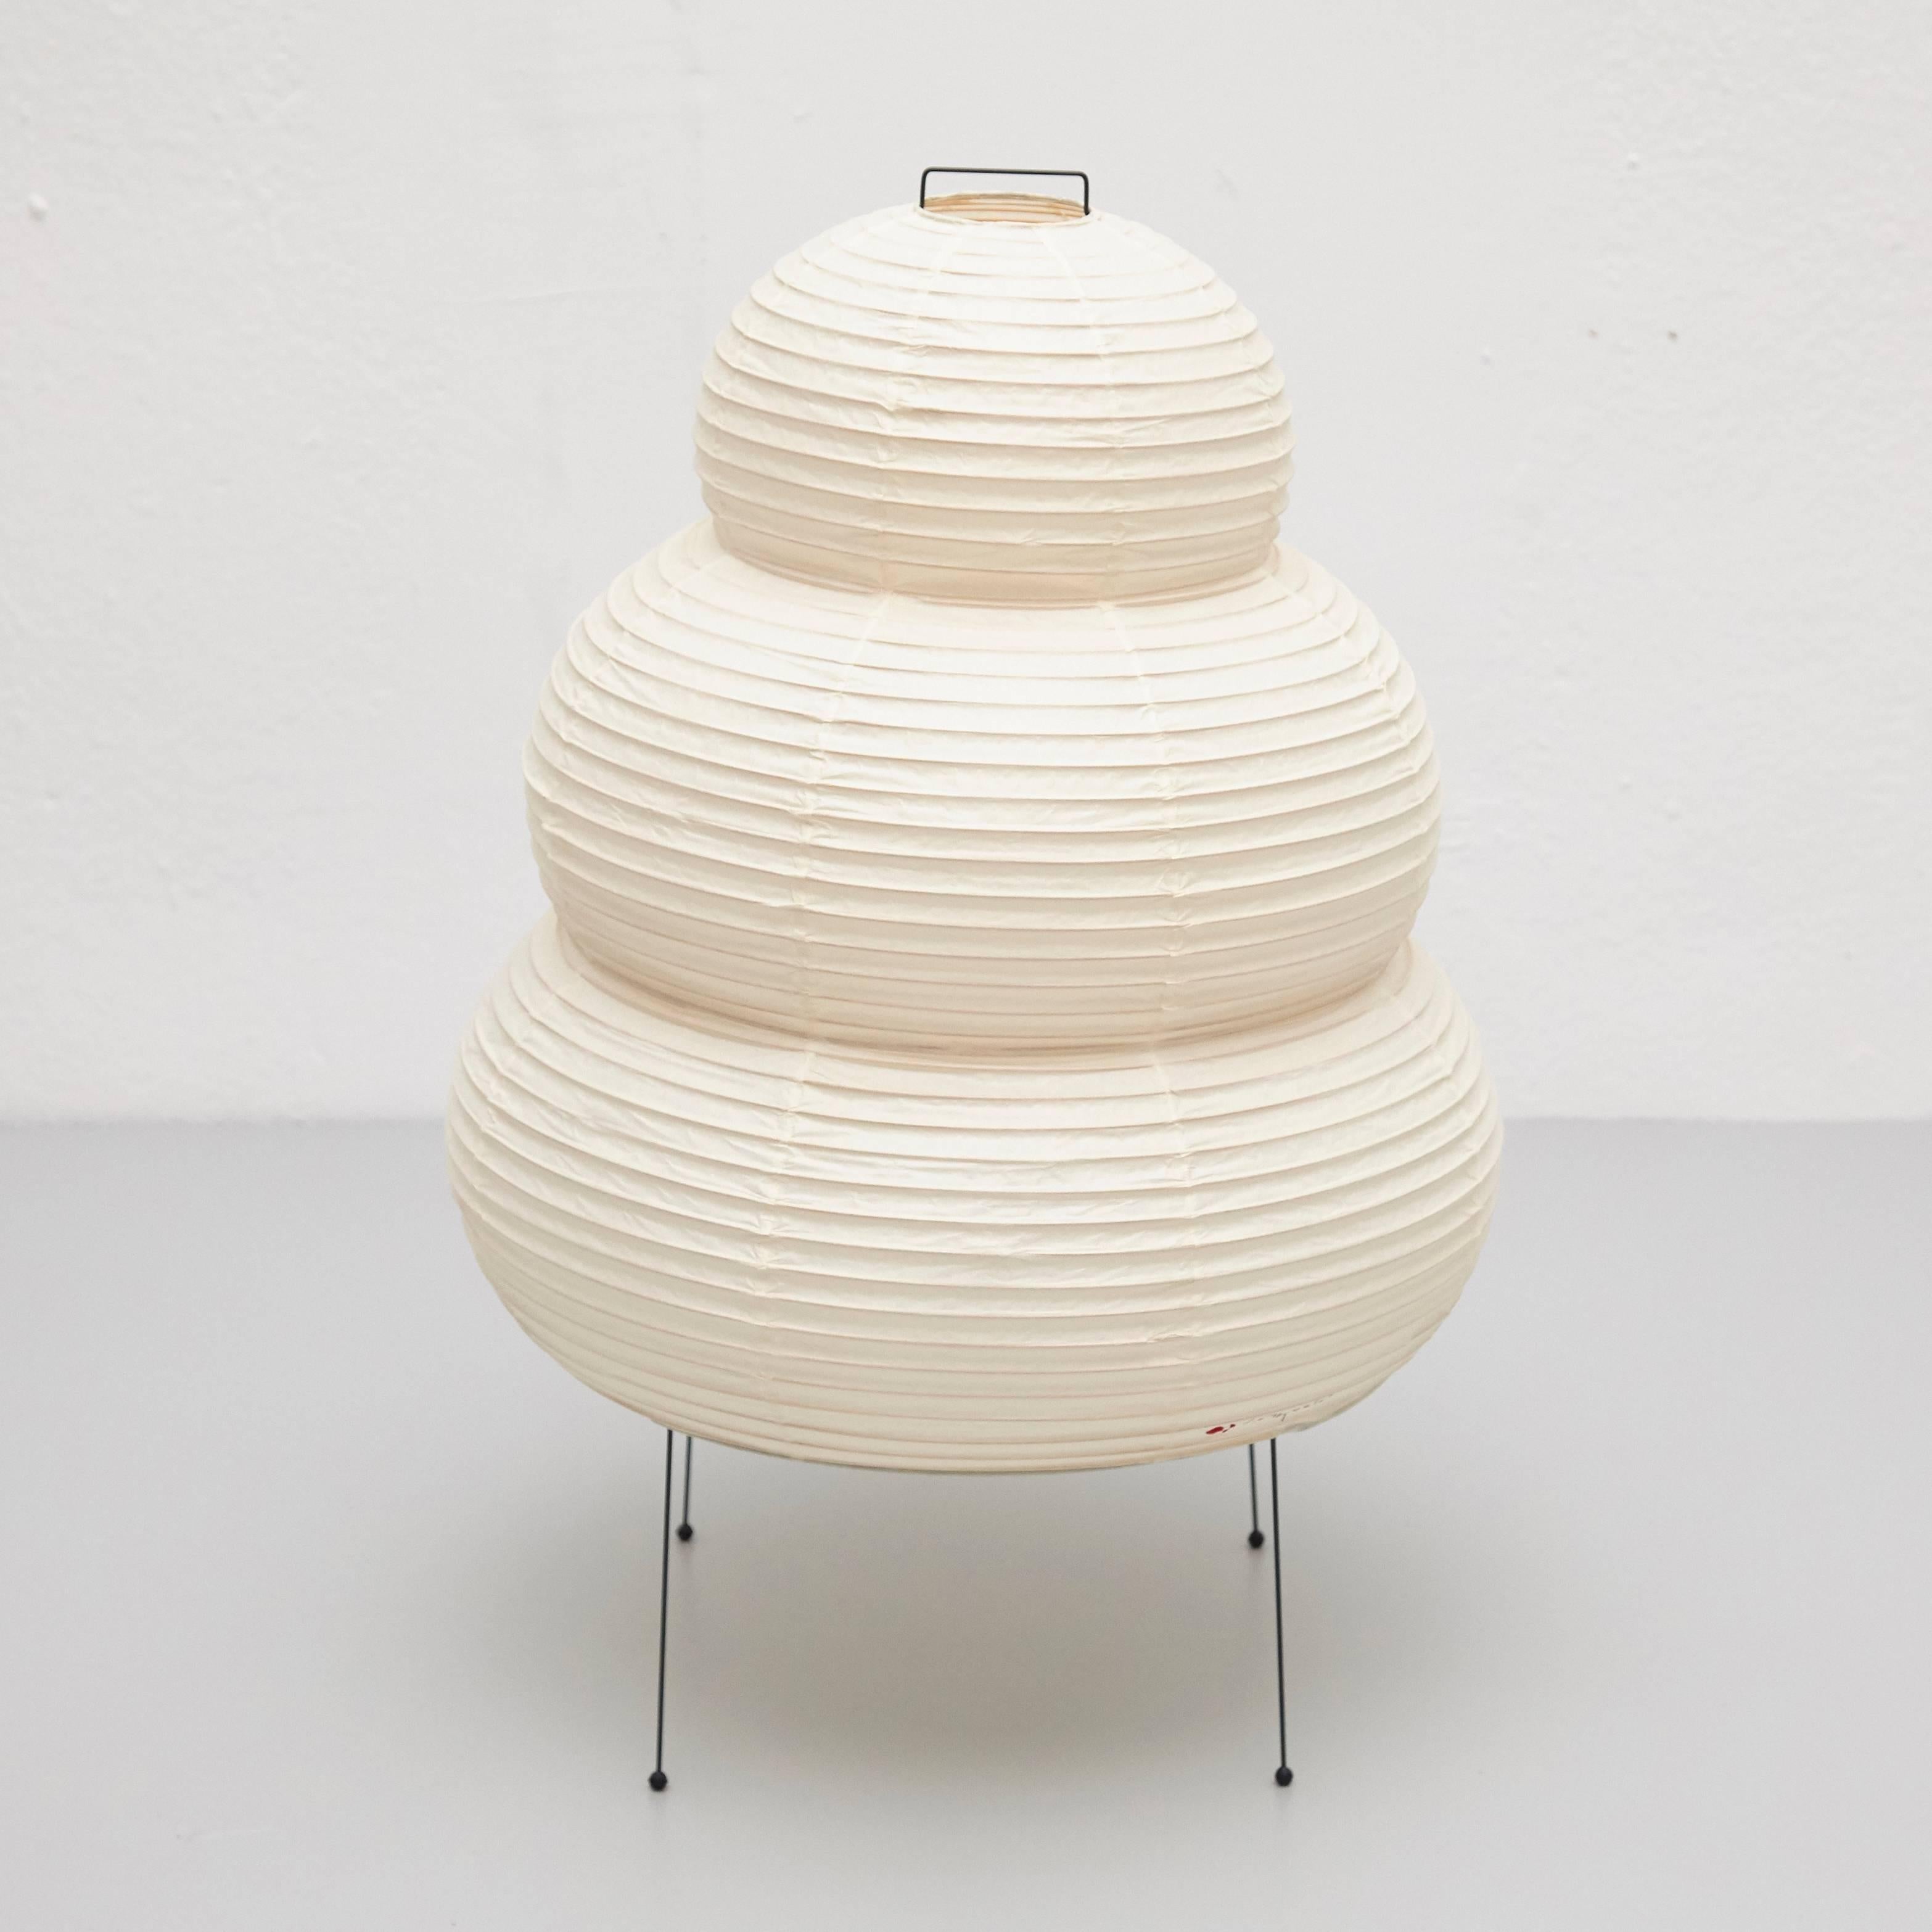 Floor lamp, model 24N, designed by Isamu Noguchi.
Manufactured by Ozeki & Company Ltd. (Japan).
Bamboo ribbing structure covered by washi paper manufactured according to the traditional procedures.

In perfect condition.

Edition signed with